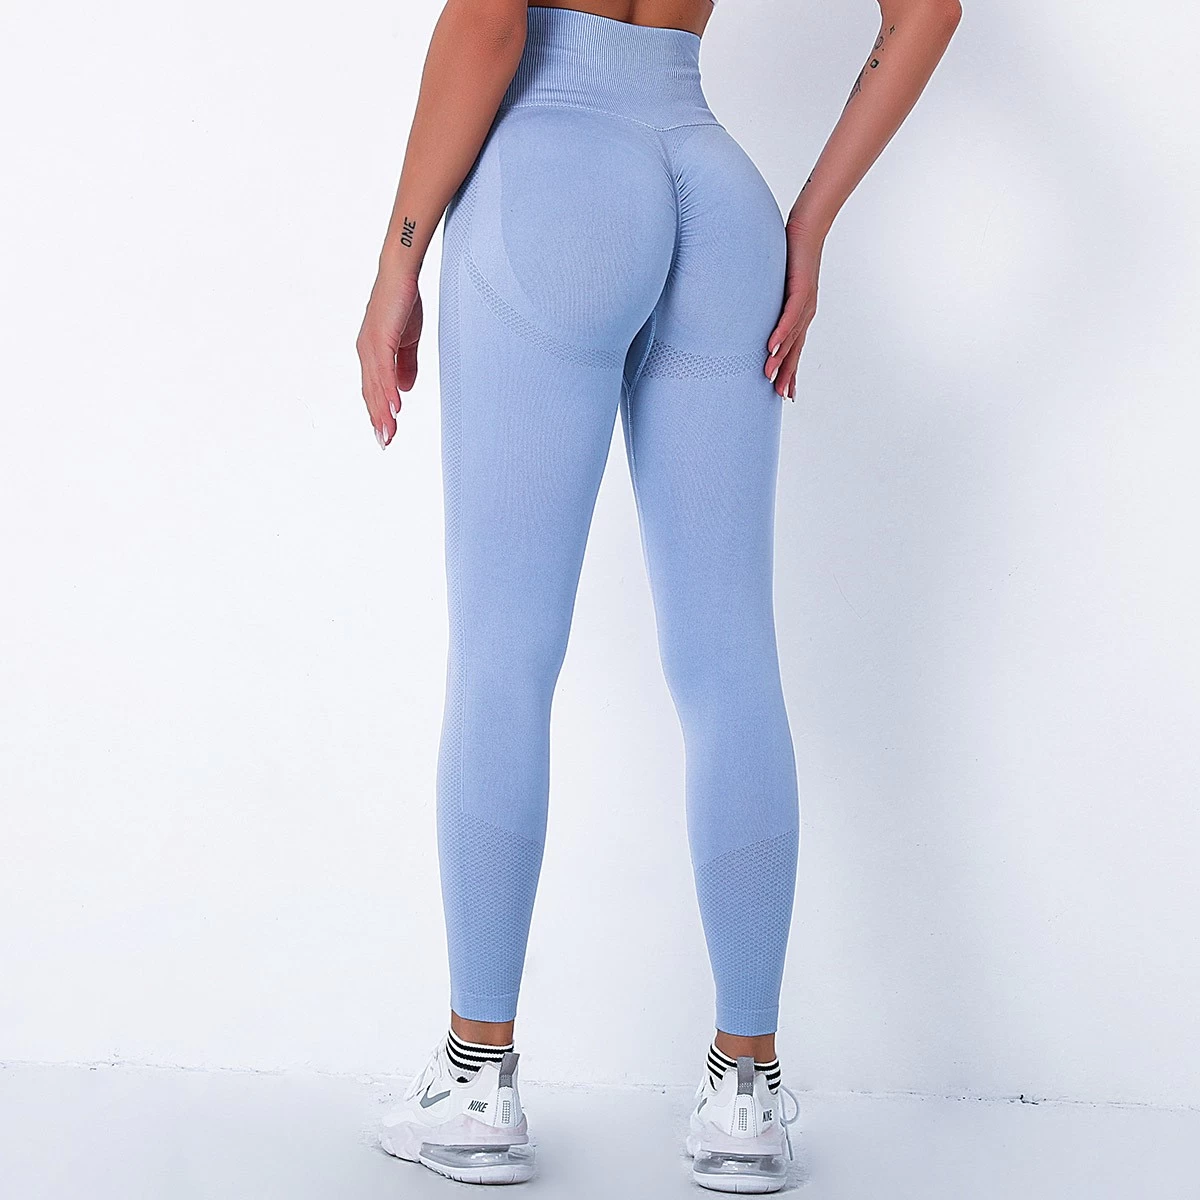 S-SHAPER High Waisted Workout Leggings for Women Compression Tummy Control Butt Lifting Soft Seamless Yoga Pants Manufacturers